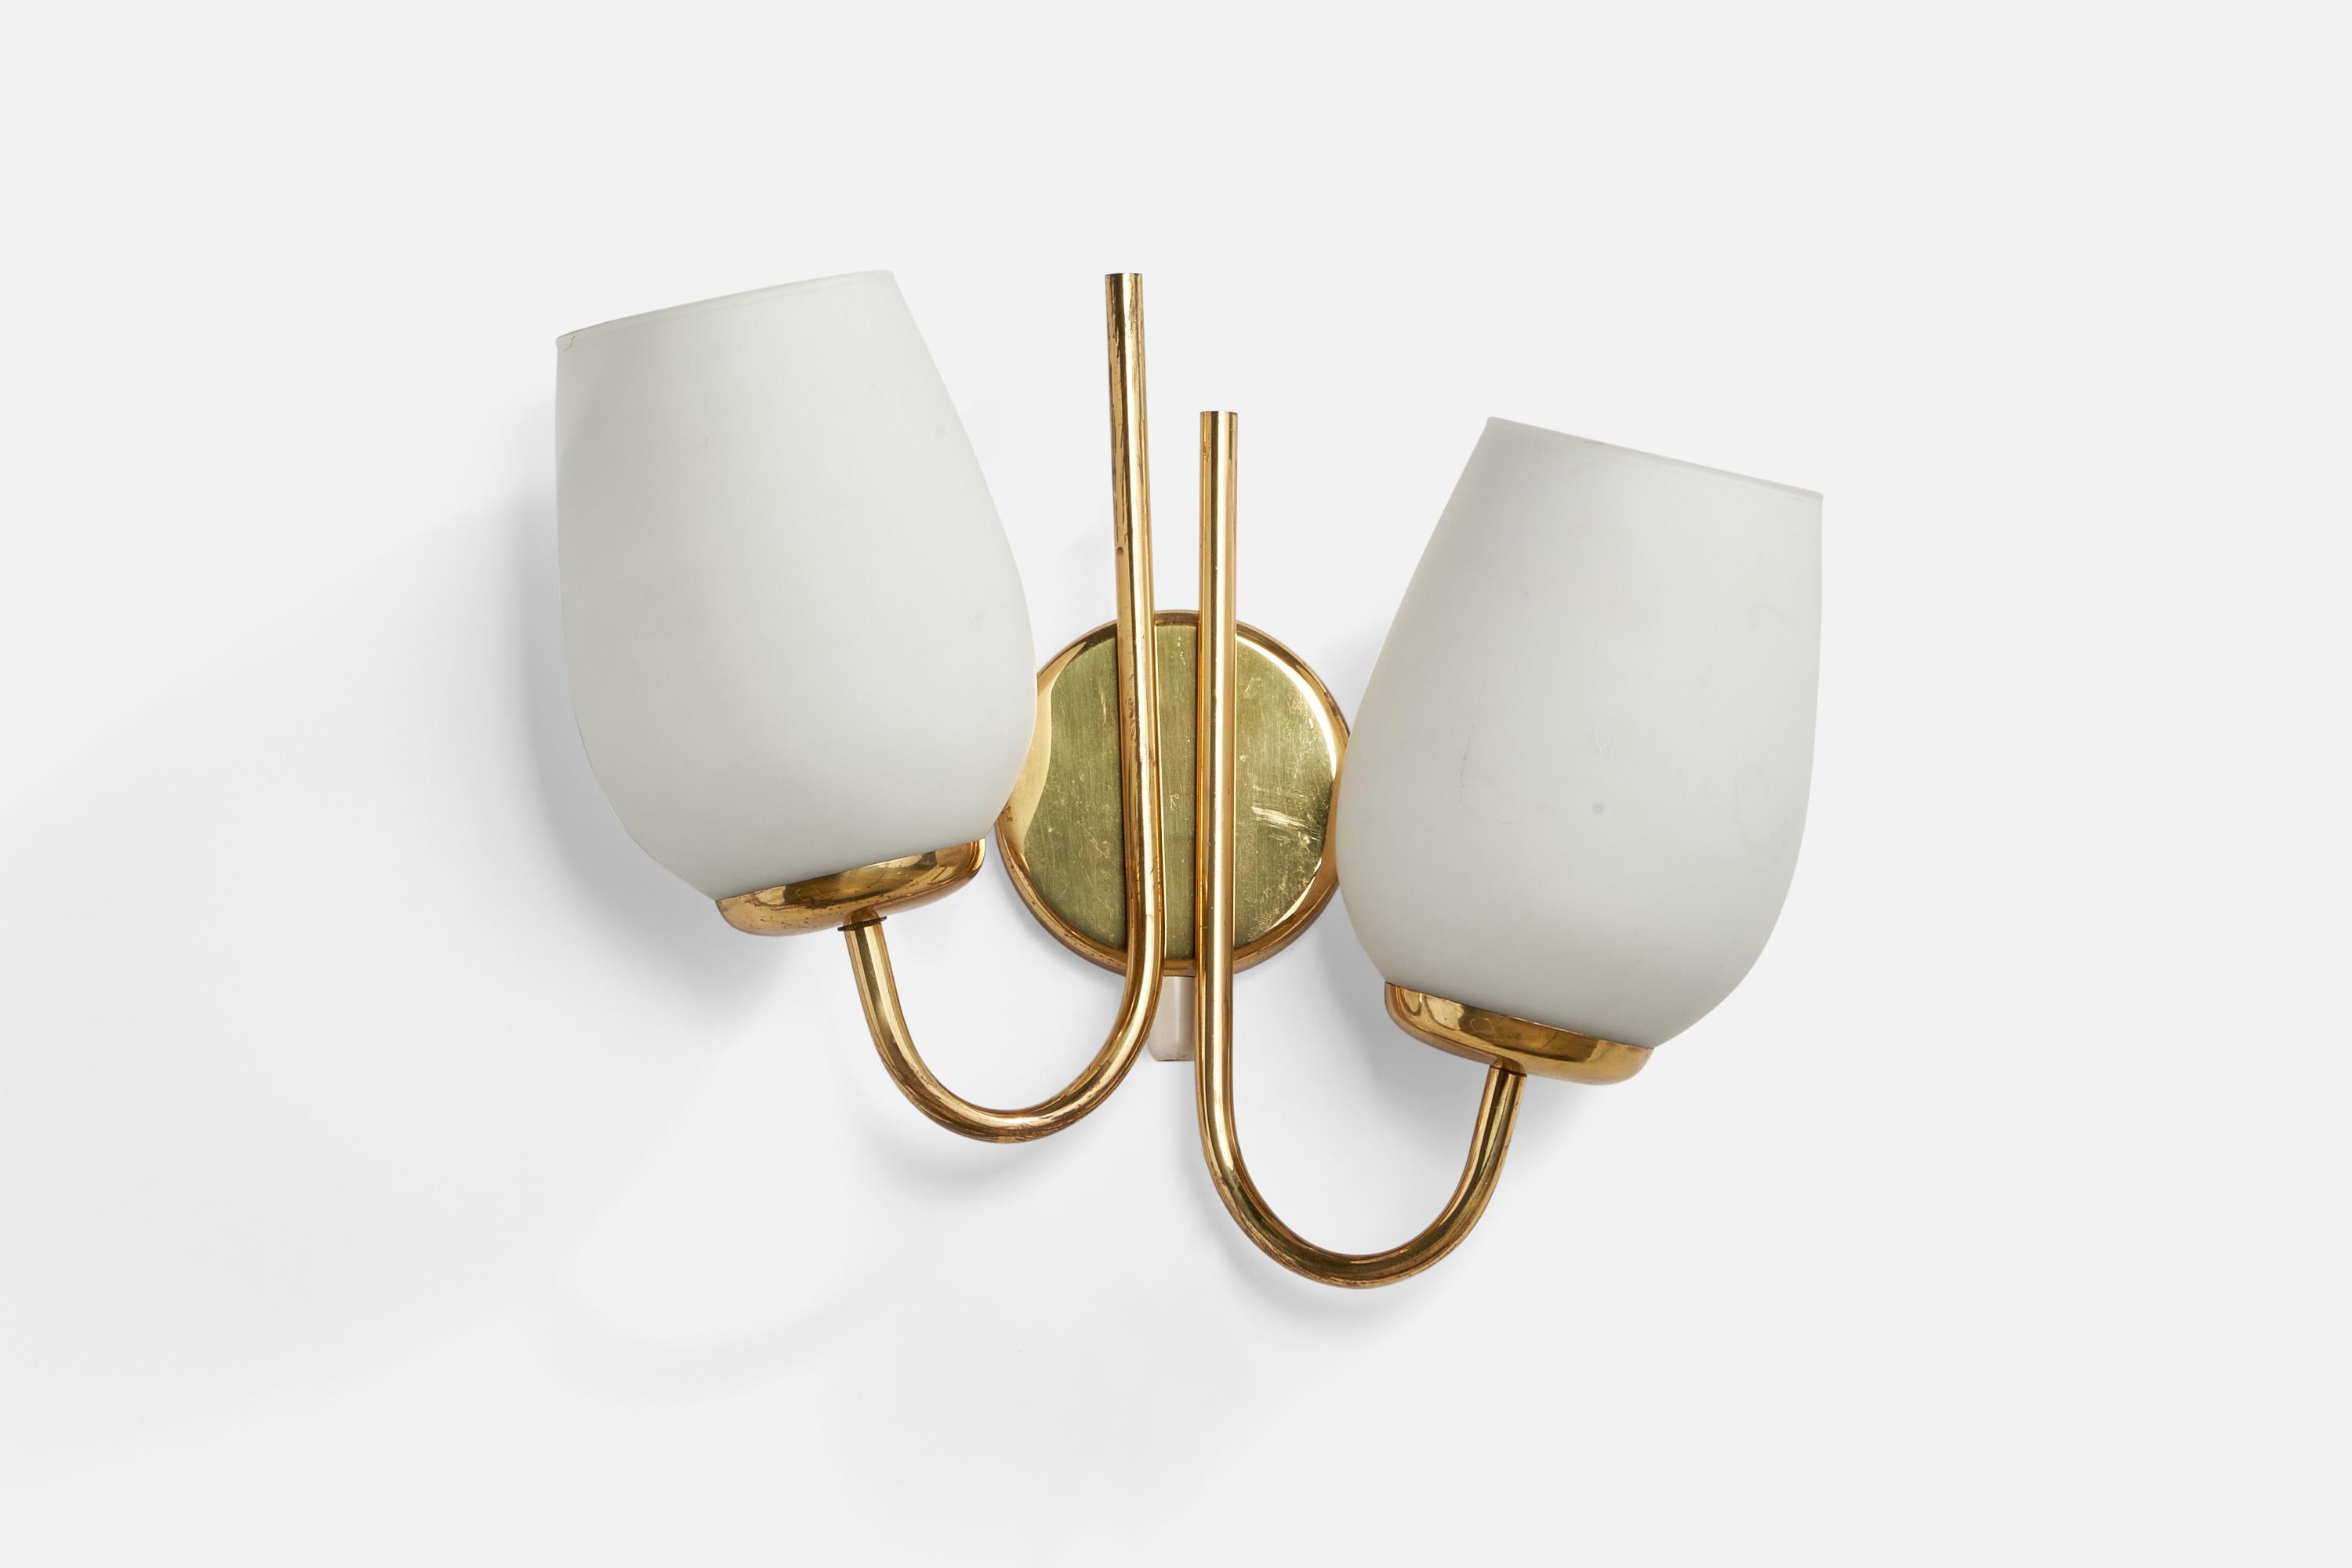 A two-armed brass and opaline glass wall light designed and produced by Itsu, Finland, 1940s.

Overall Dimensions (inches): 10.5” H x 11.75” W x 5.25” D
Back Plate Dimensions (inches): 3.8” Diameter x 0.75” Depth
Bulb Specifications: E-26